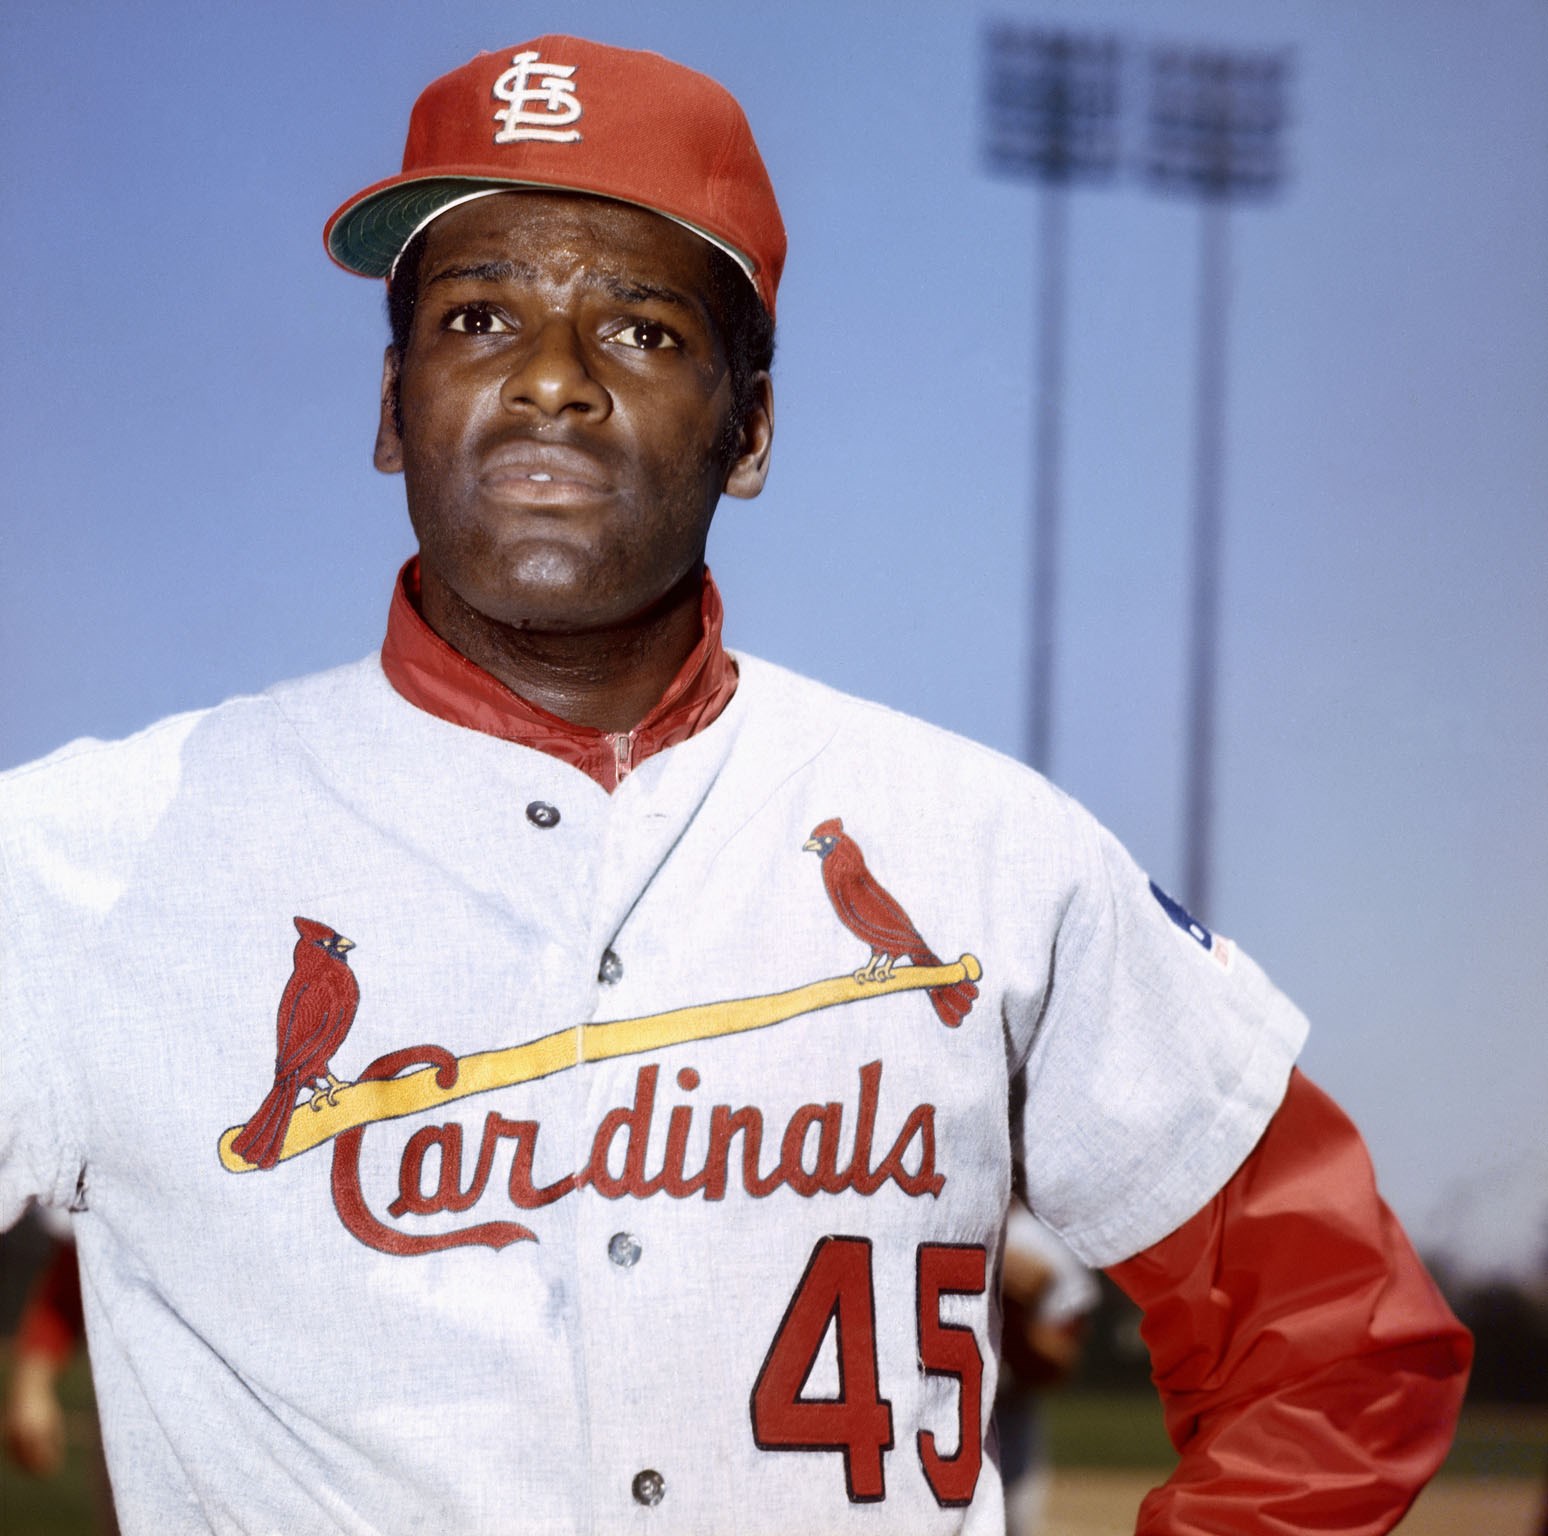 - Dinner for Four with Legendary St. Louis Cardinals Pitcher Bob Gibson